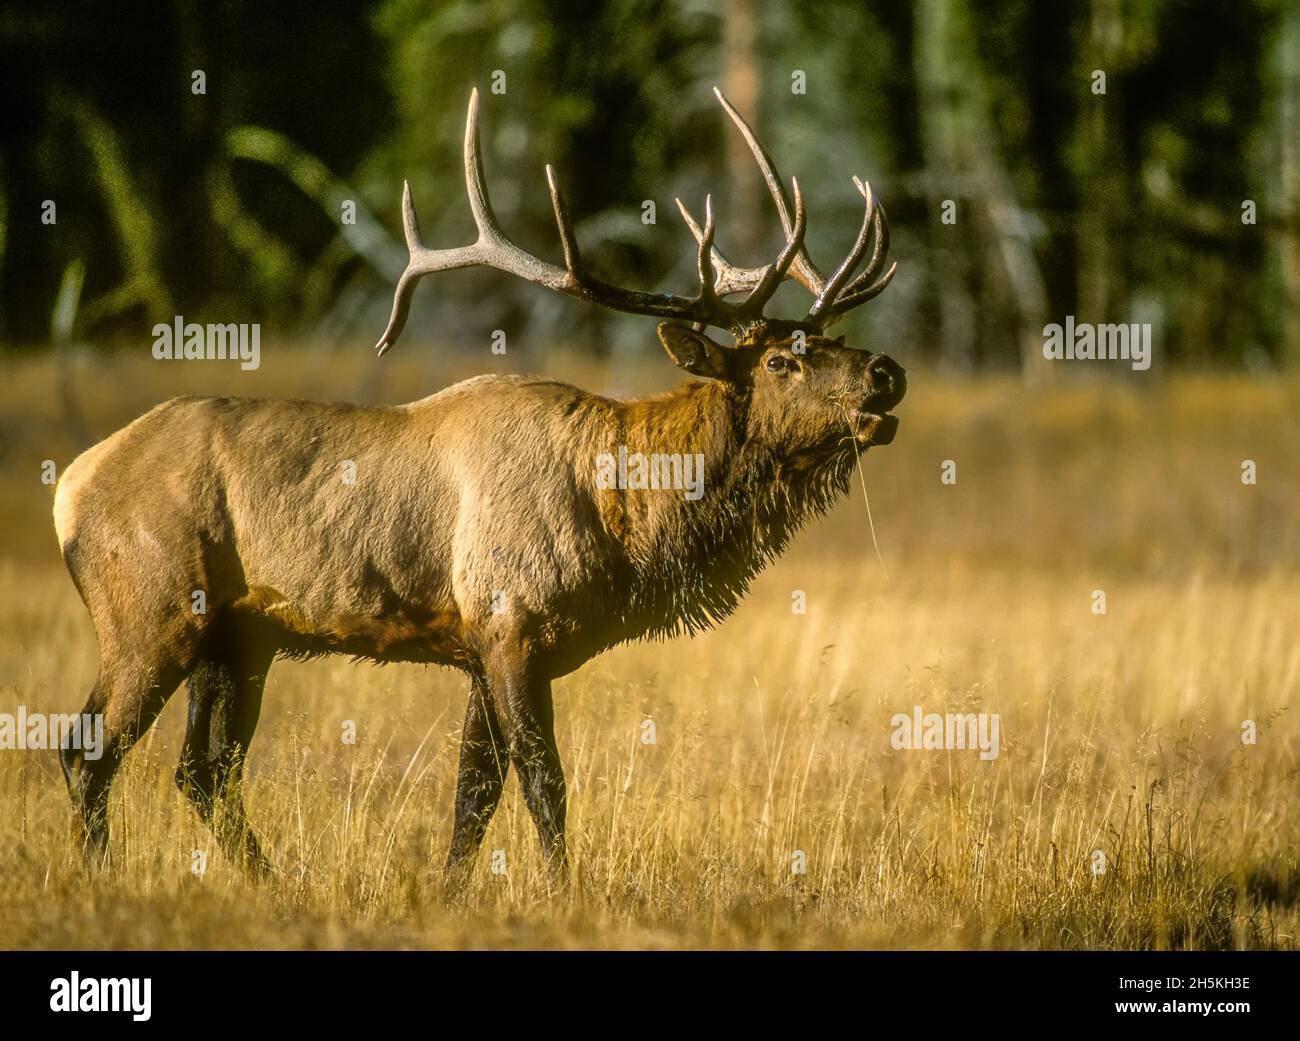 Close-up of a bull elk (Cervus canadensis) bugling, calling with a high-pitched sound during rut, mating season in September. Bugling is a challeng... Stock Photo